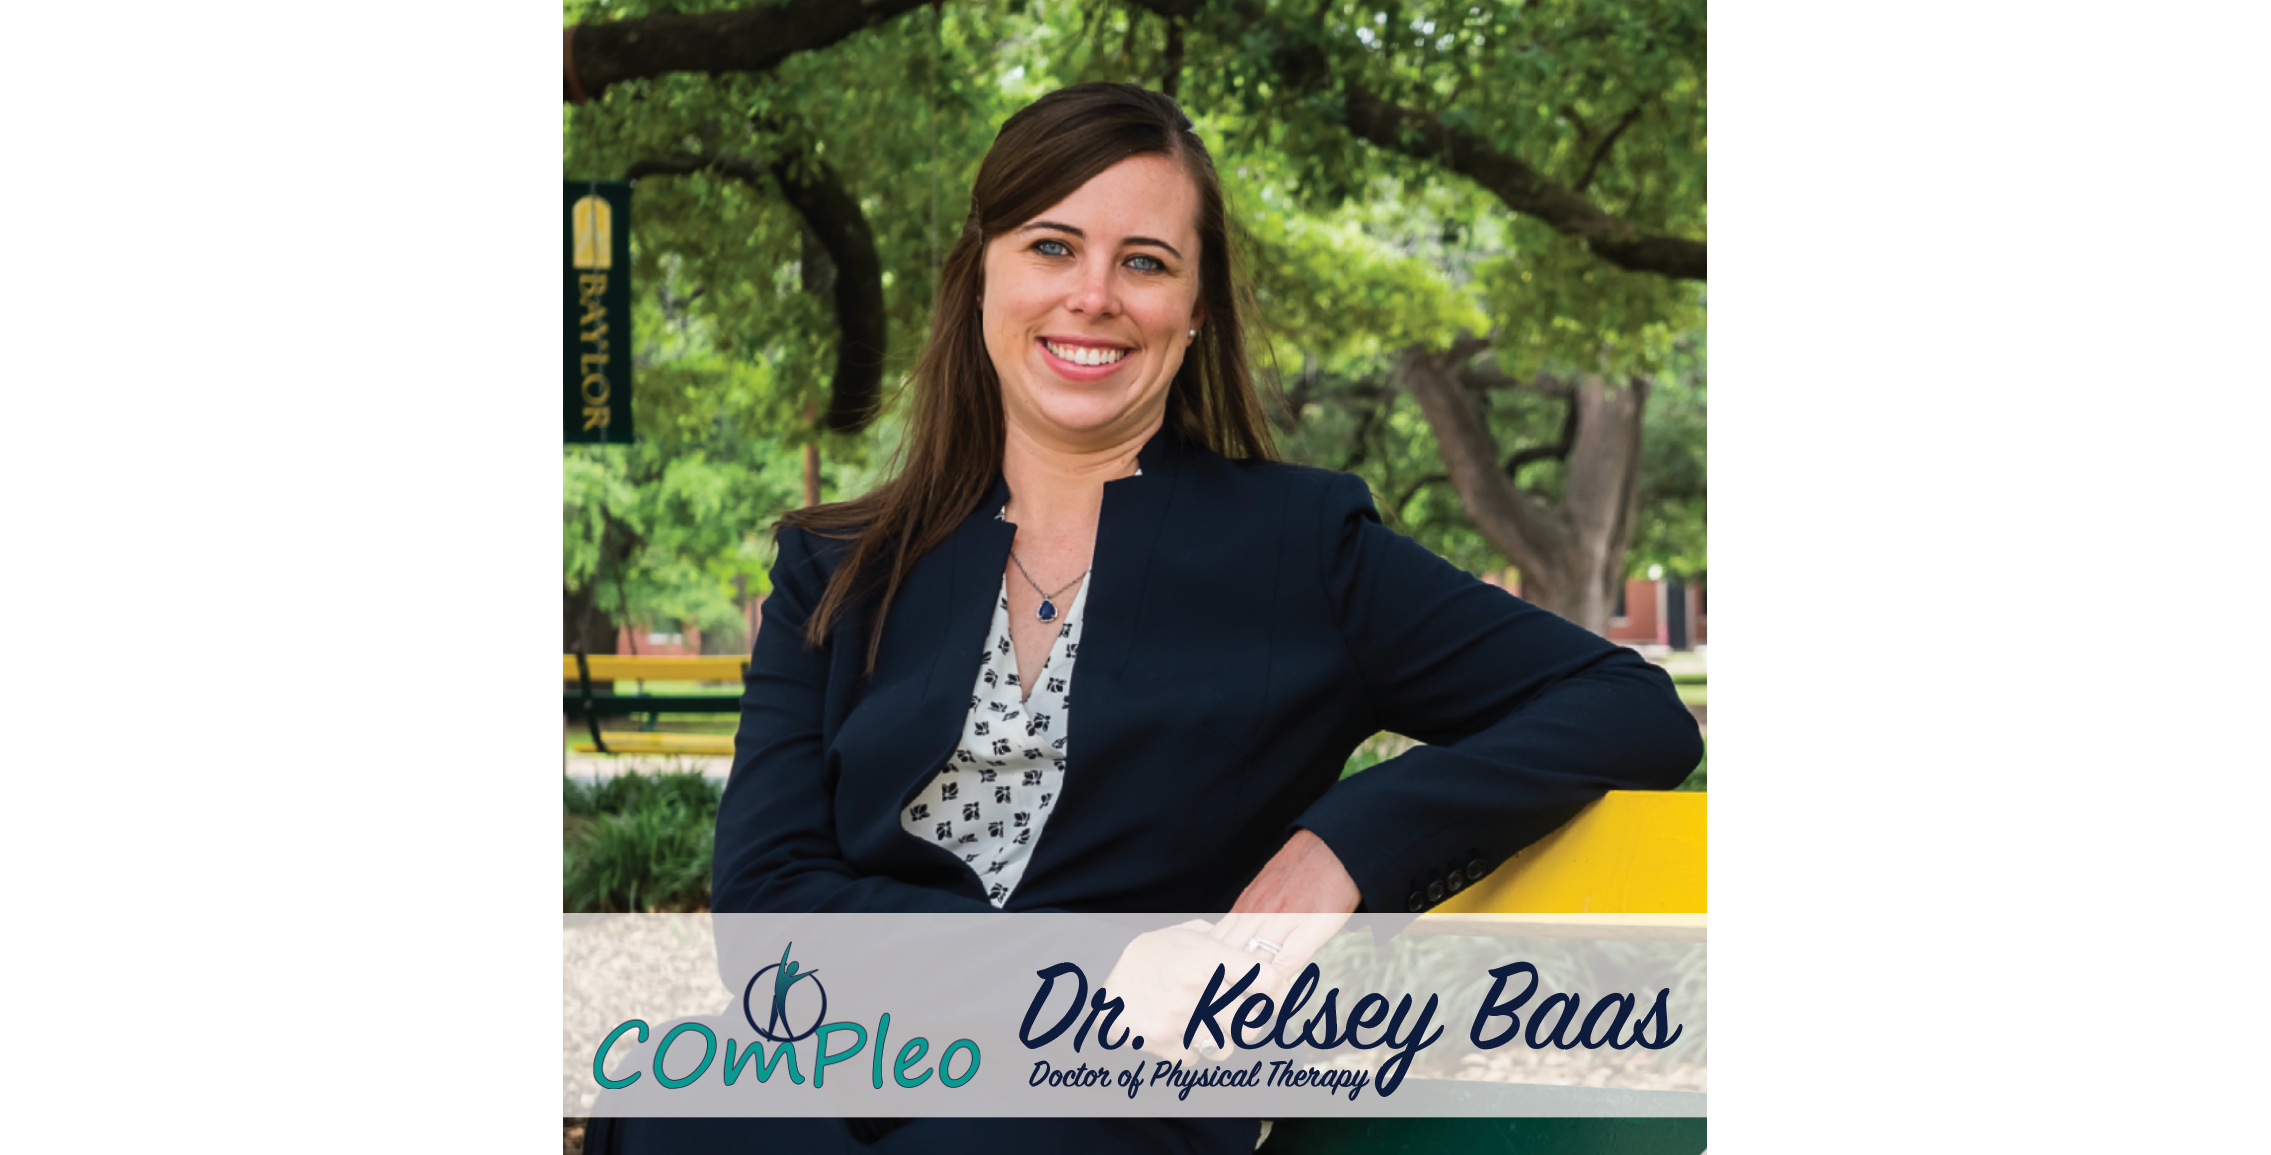 Be Cared for as a Whole - Dr. Kelsey Baas